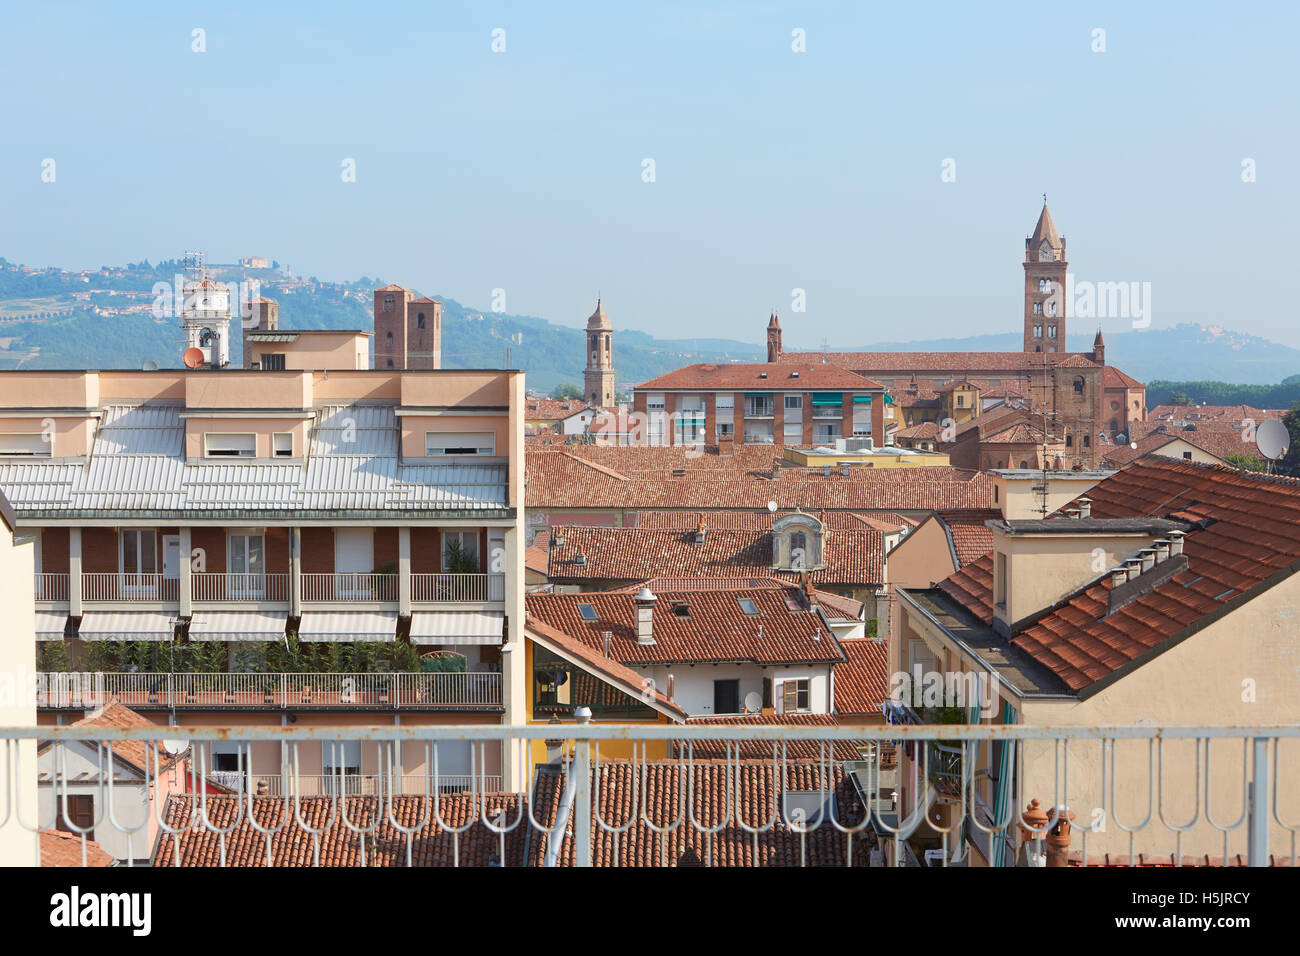 Alba rooftops with cathedral's bell tower view, Italy Stock Photo